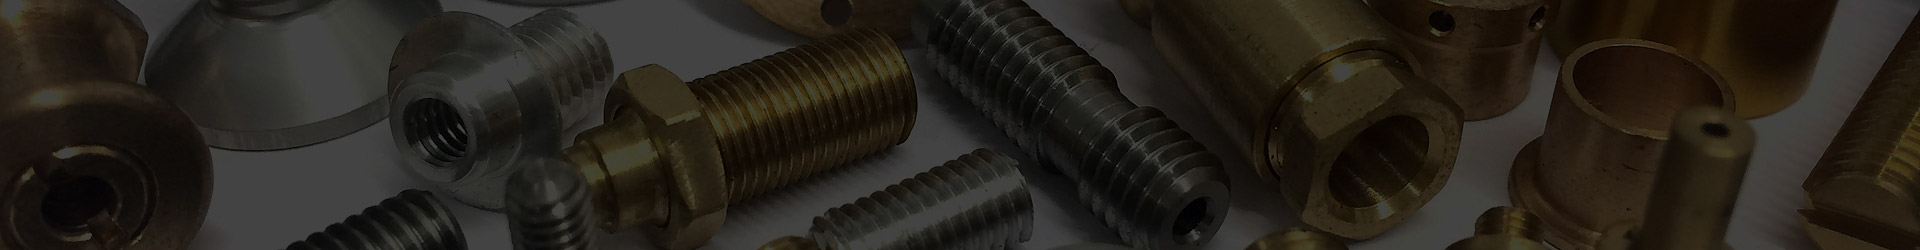 Brass Parts For Textile Industry